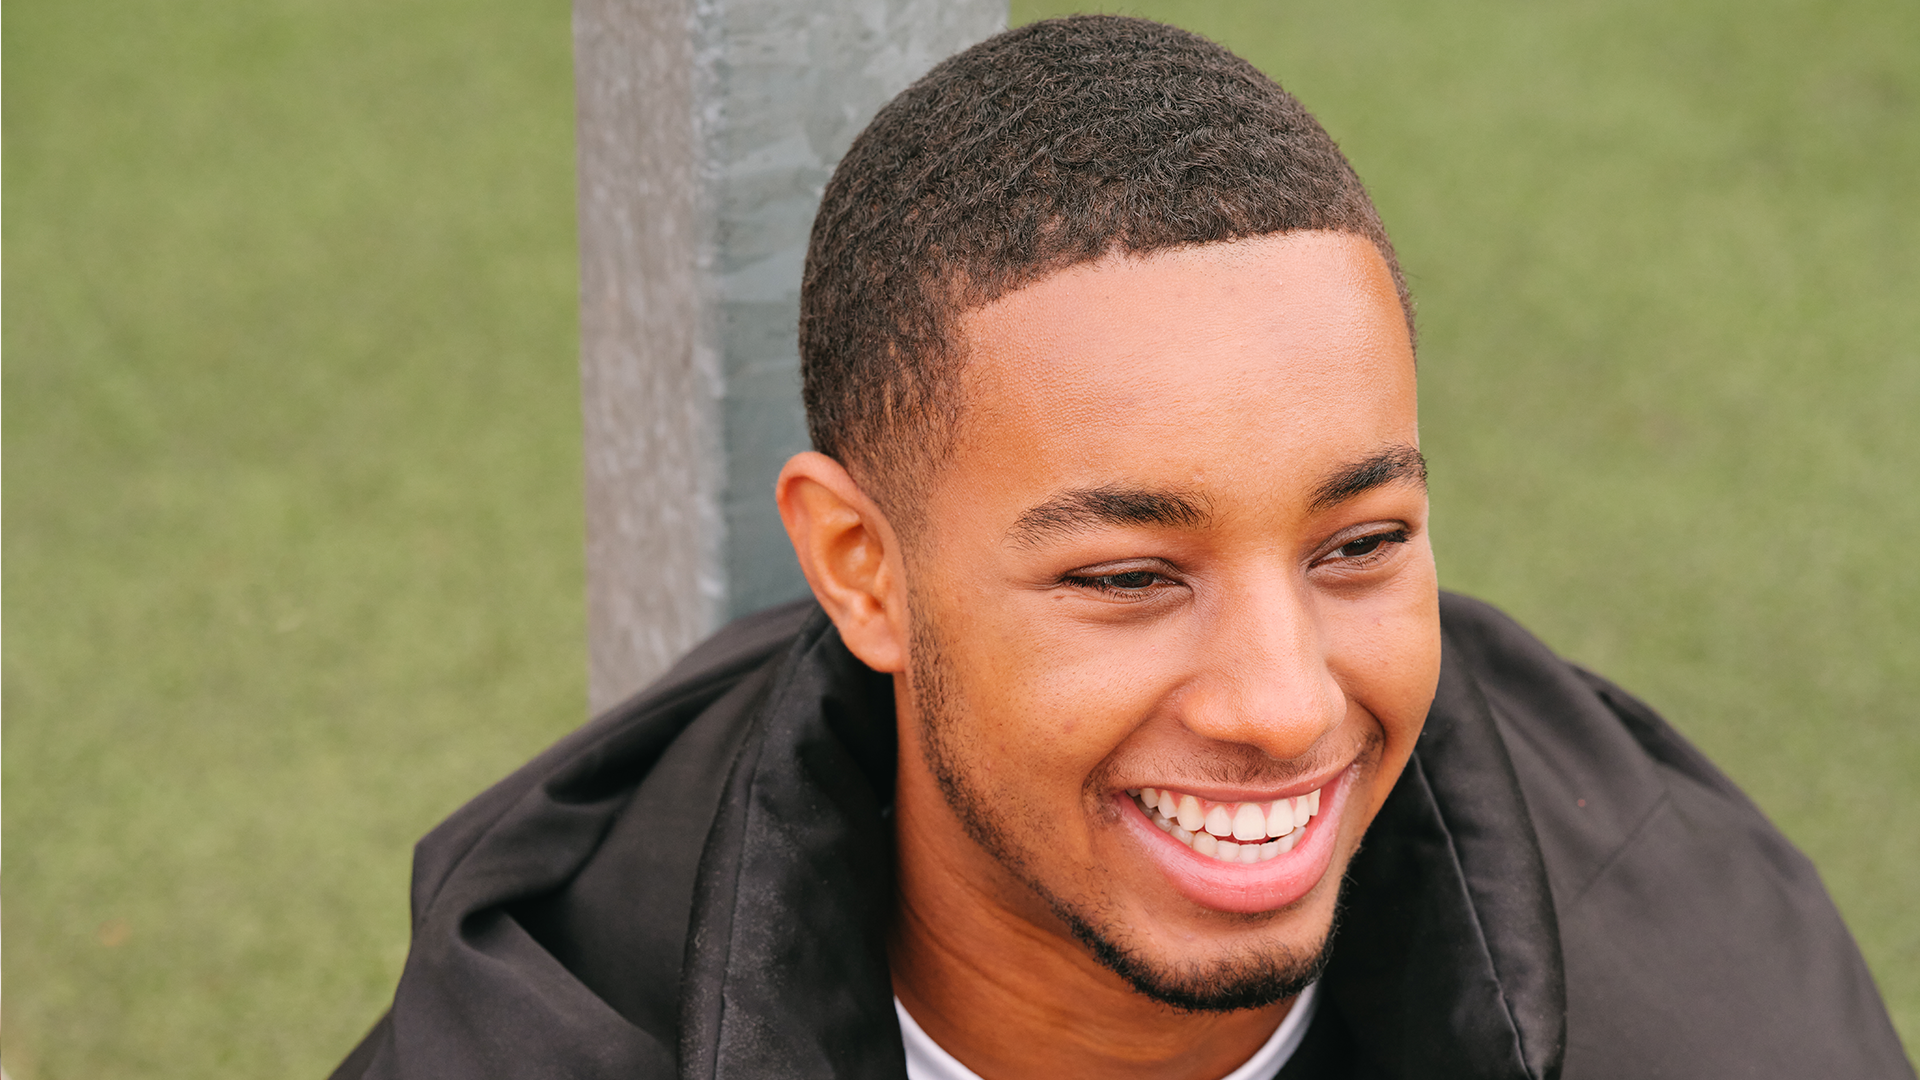 A young Black man smiling in the park.